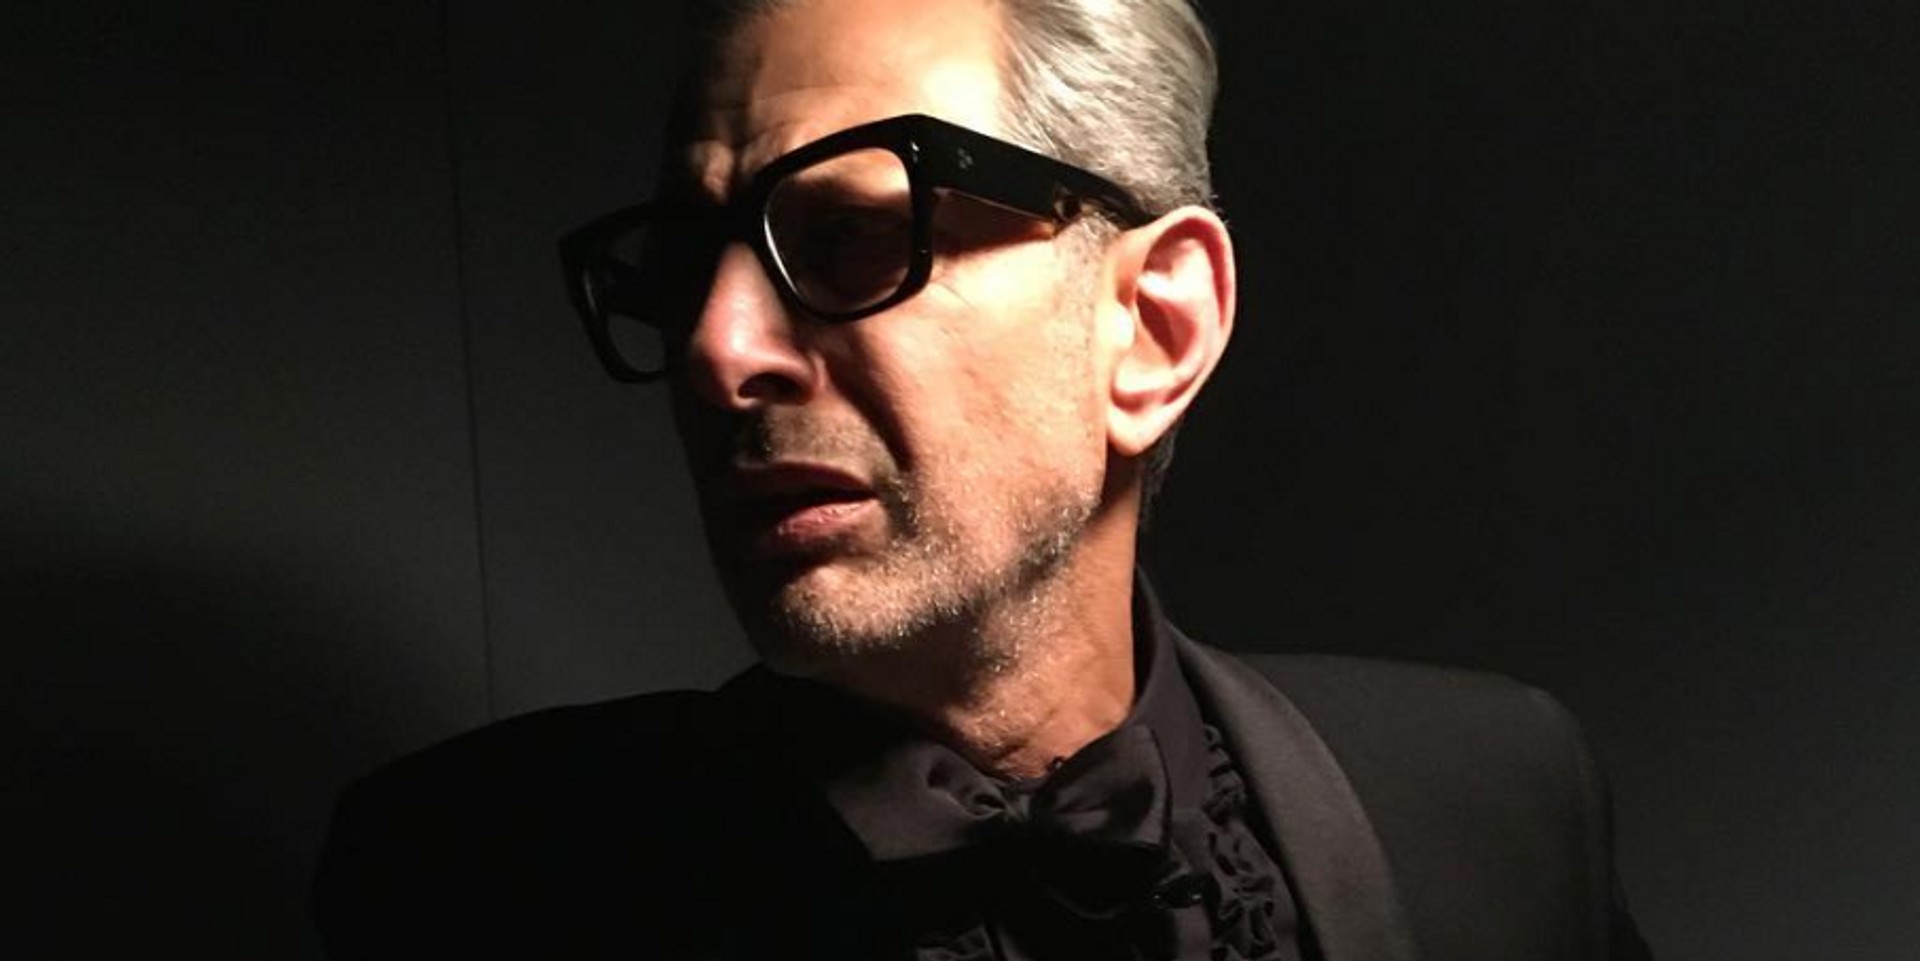 Music... finds a way: Jeff Goldblum to release debut album this year